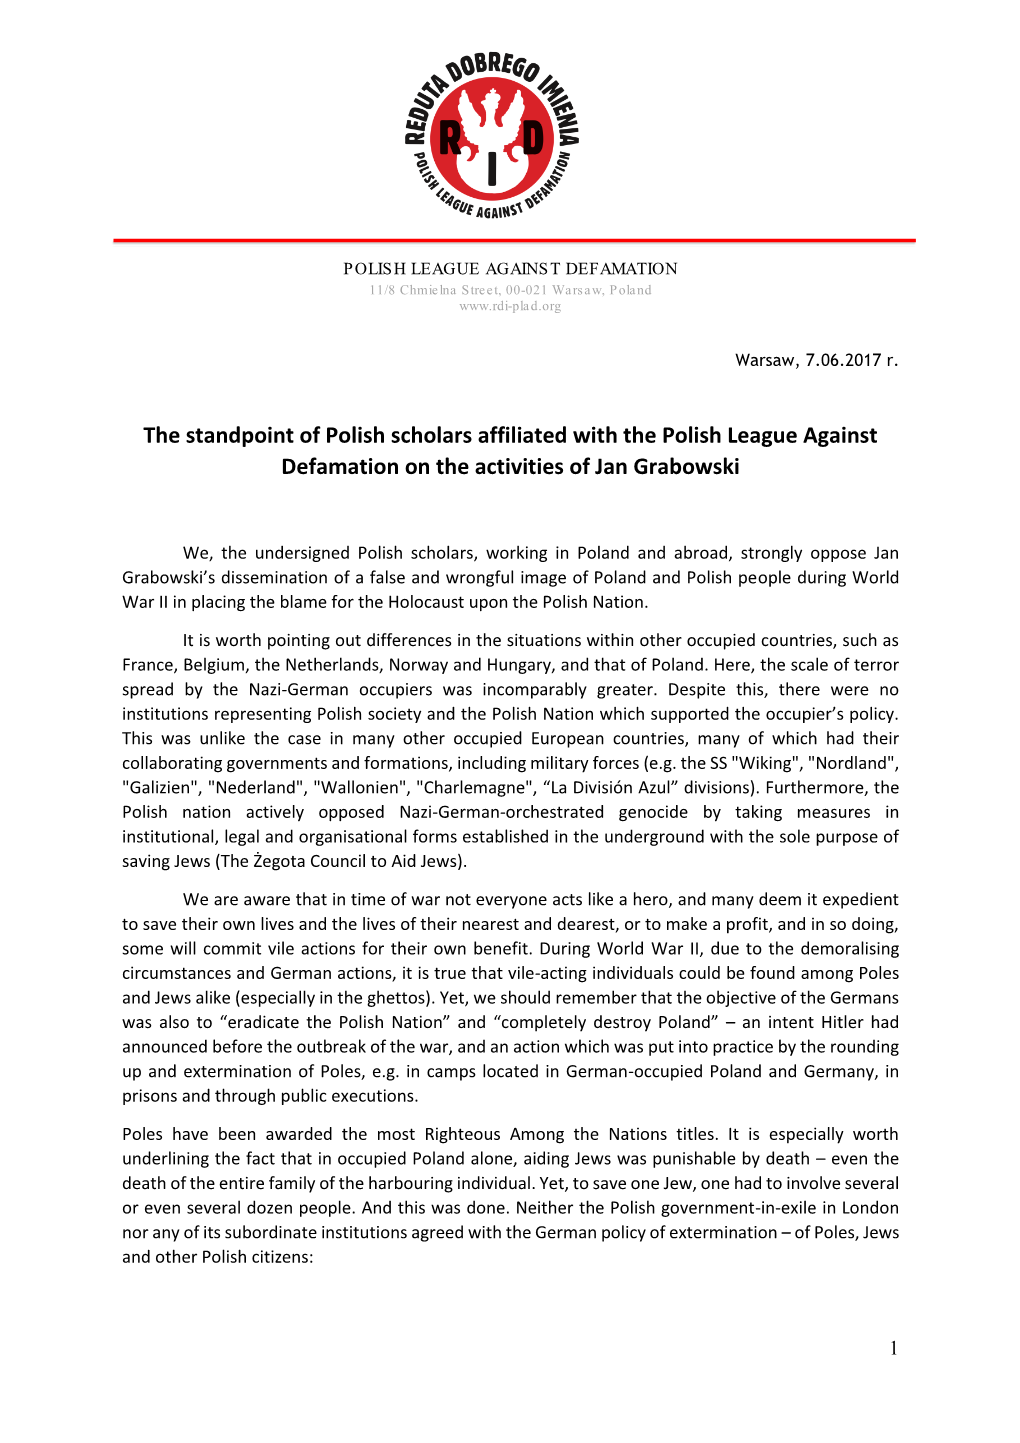 The Standpoint of Polish Scholars Affiliated with the Polish League Against Defamation on the Activities of Jan Grabowski